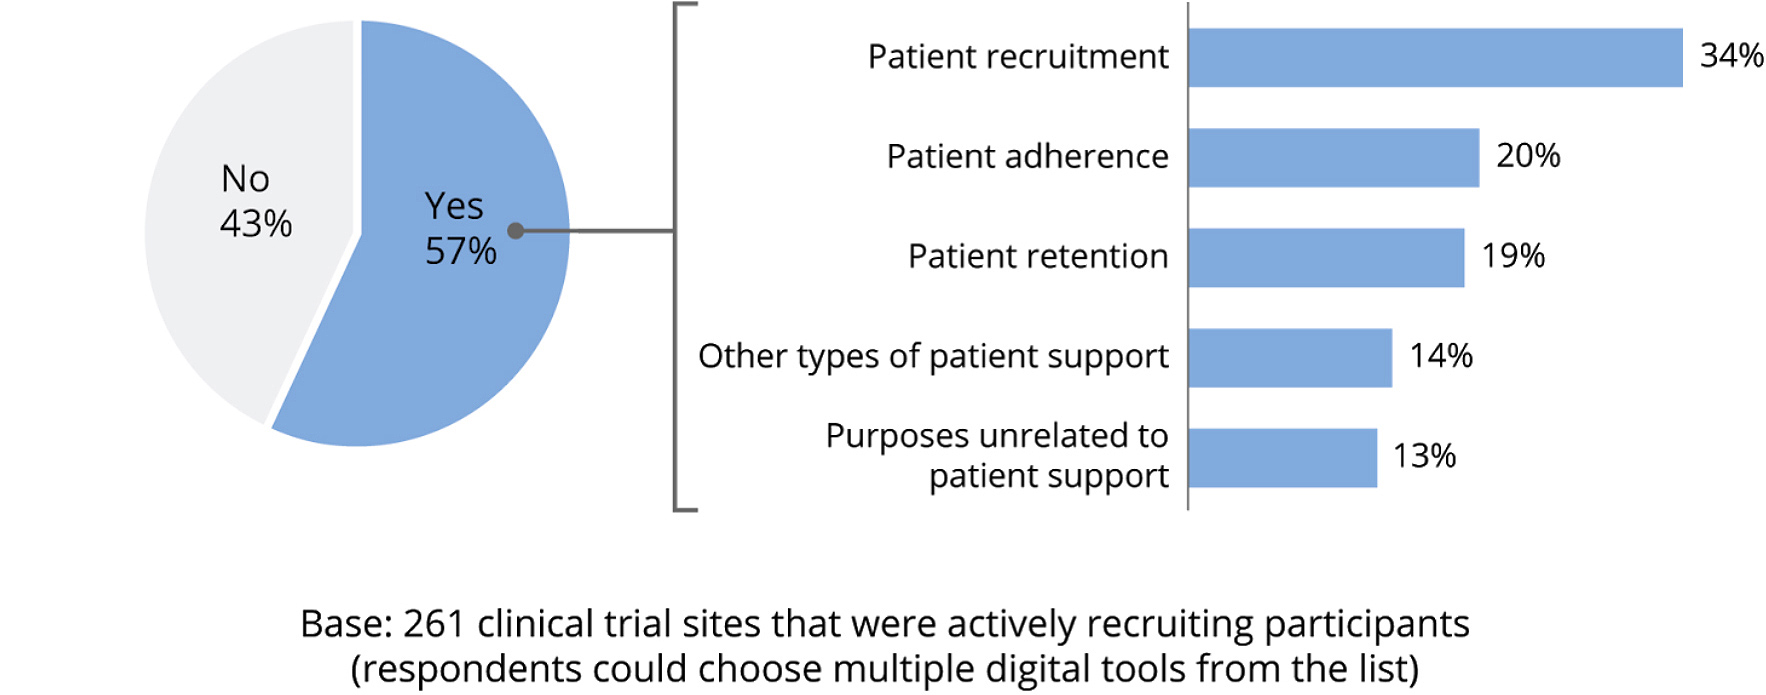 DT Consulting Clinical Trial Survey, 2021 pie chart